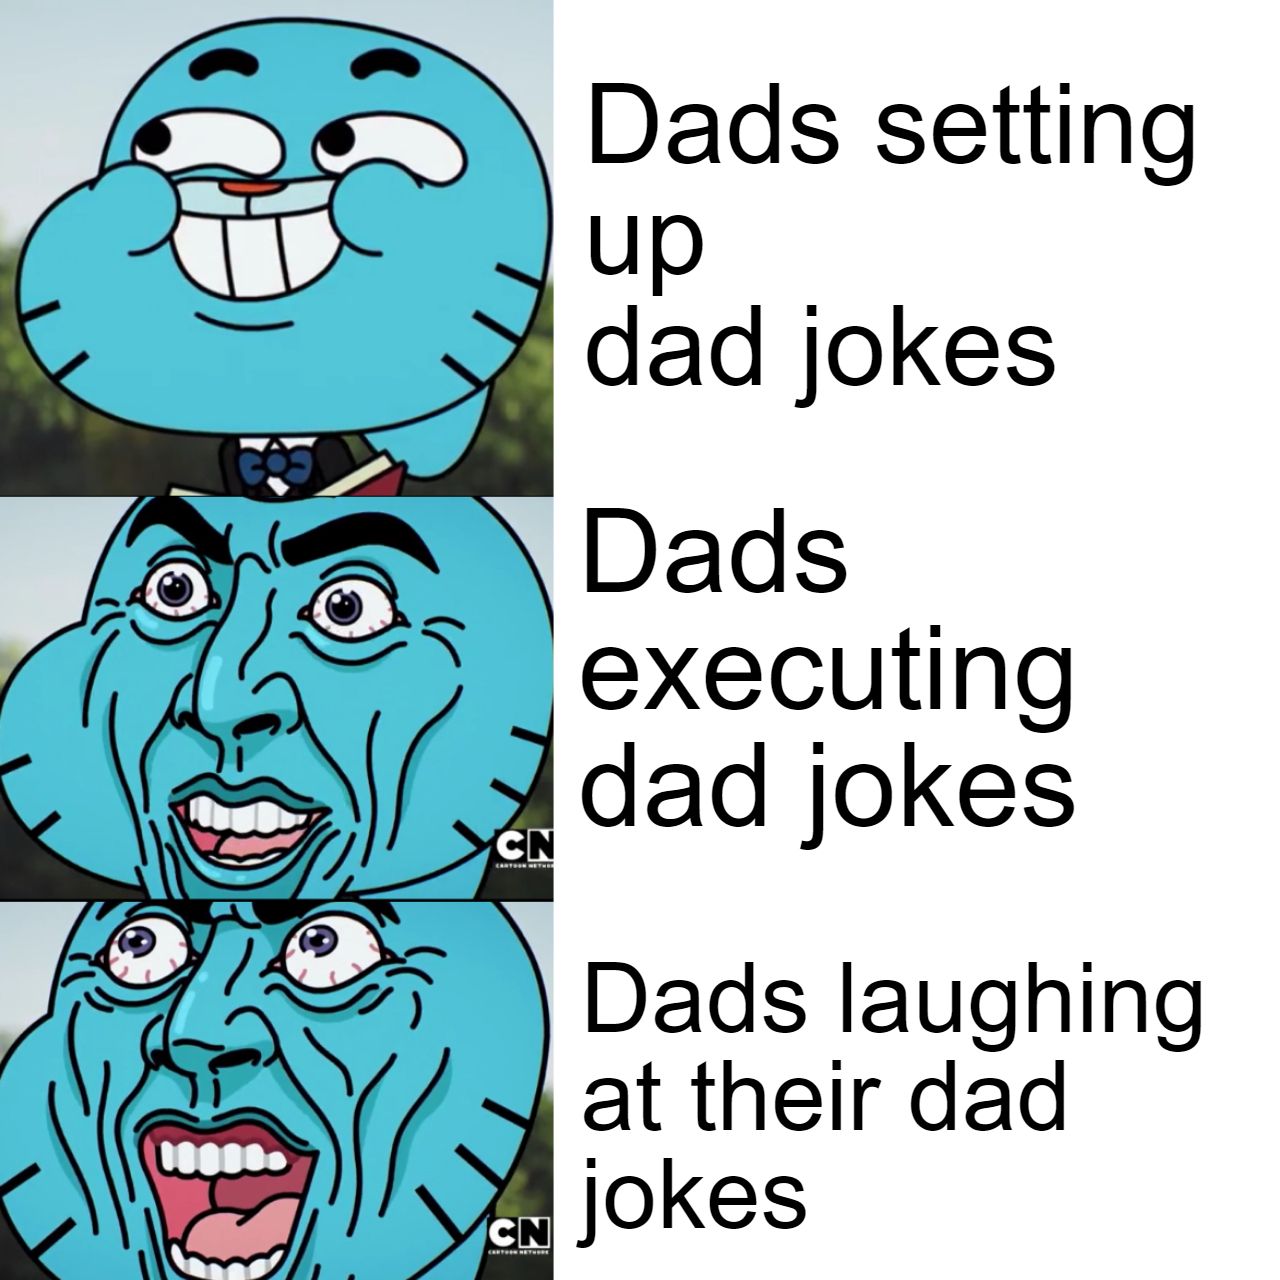 The three main stages of Dad jokes